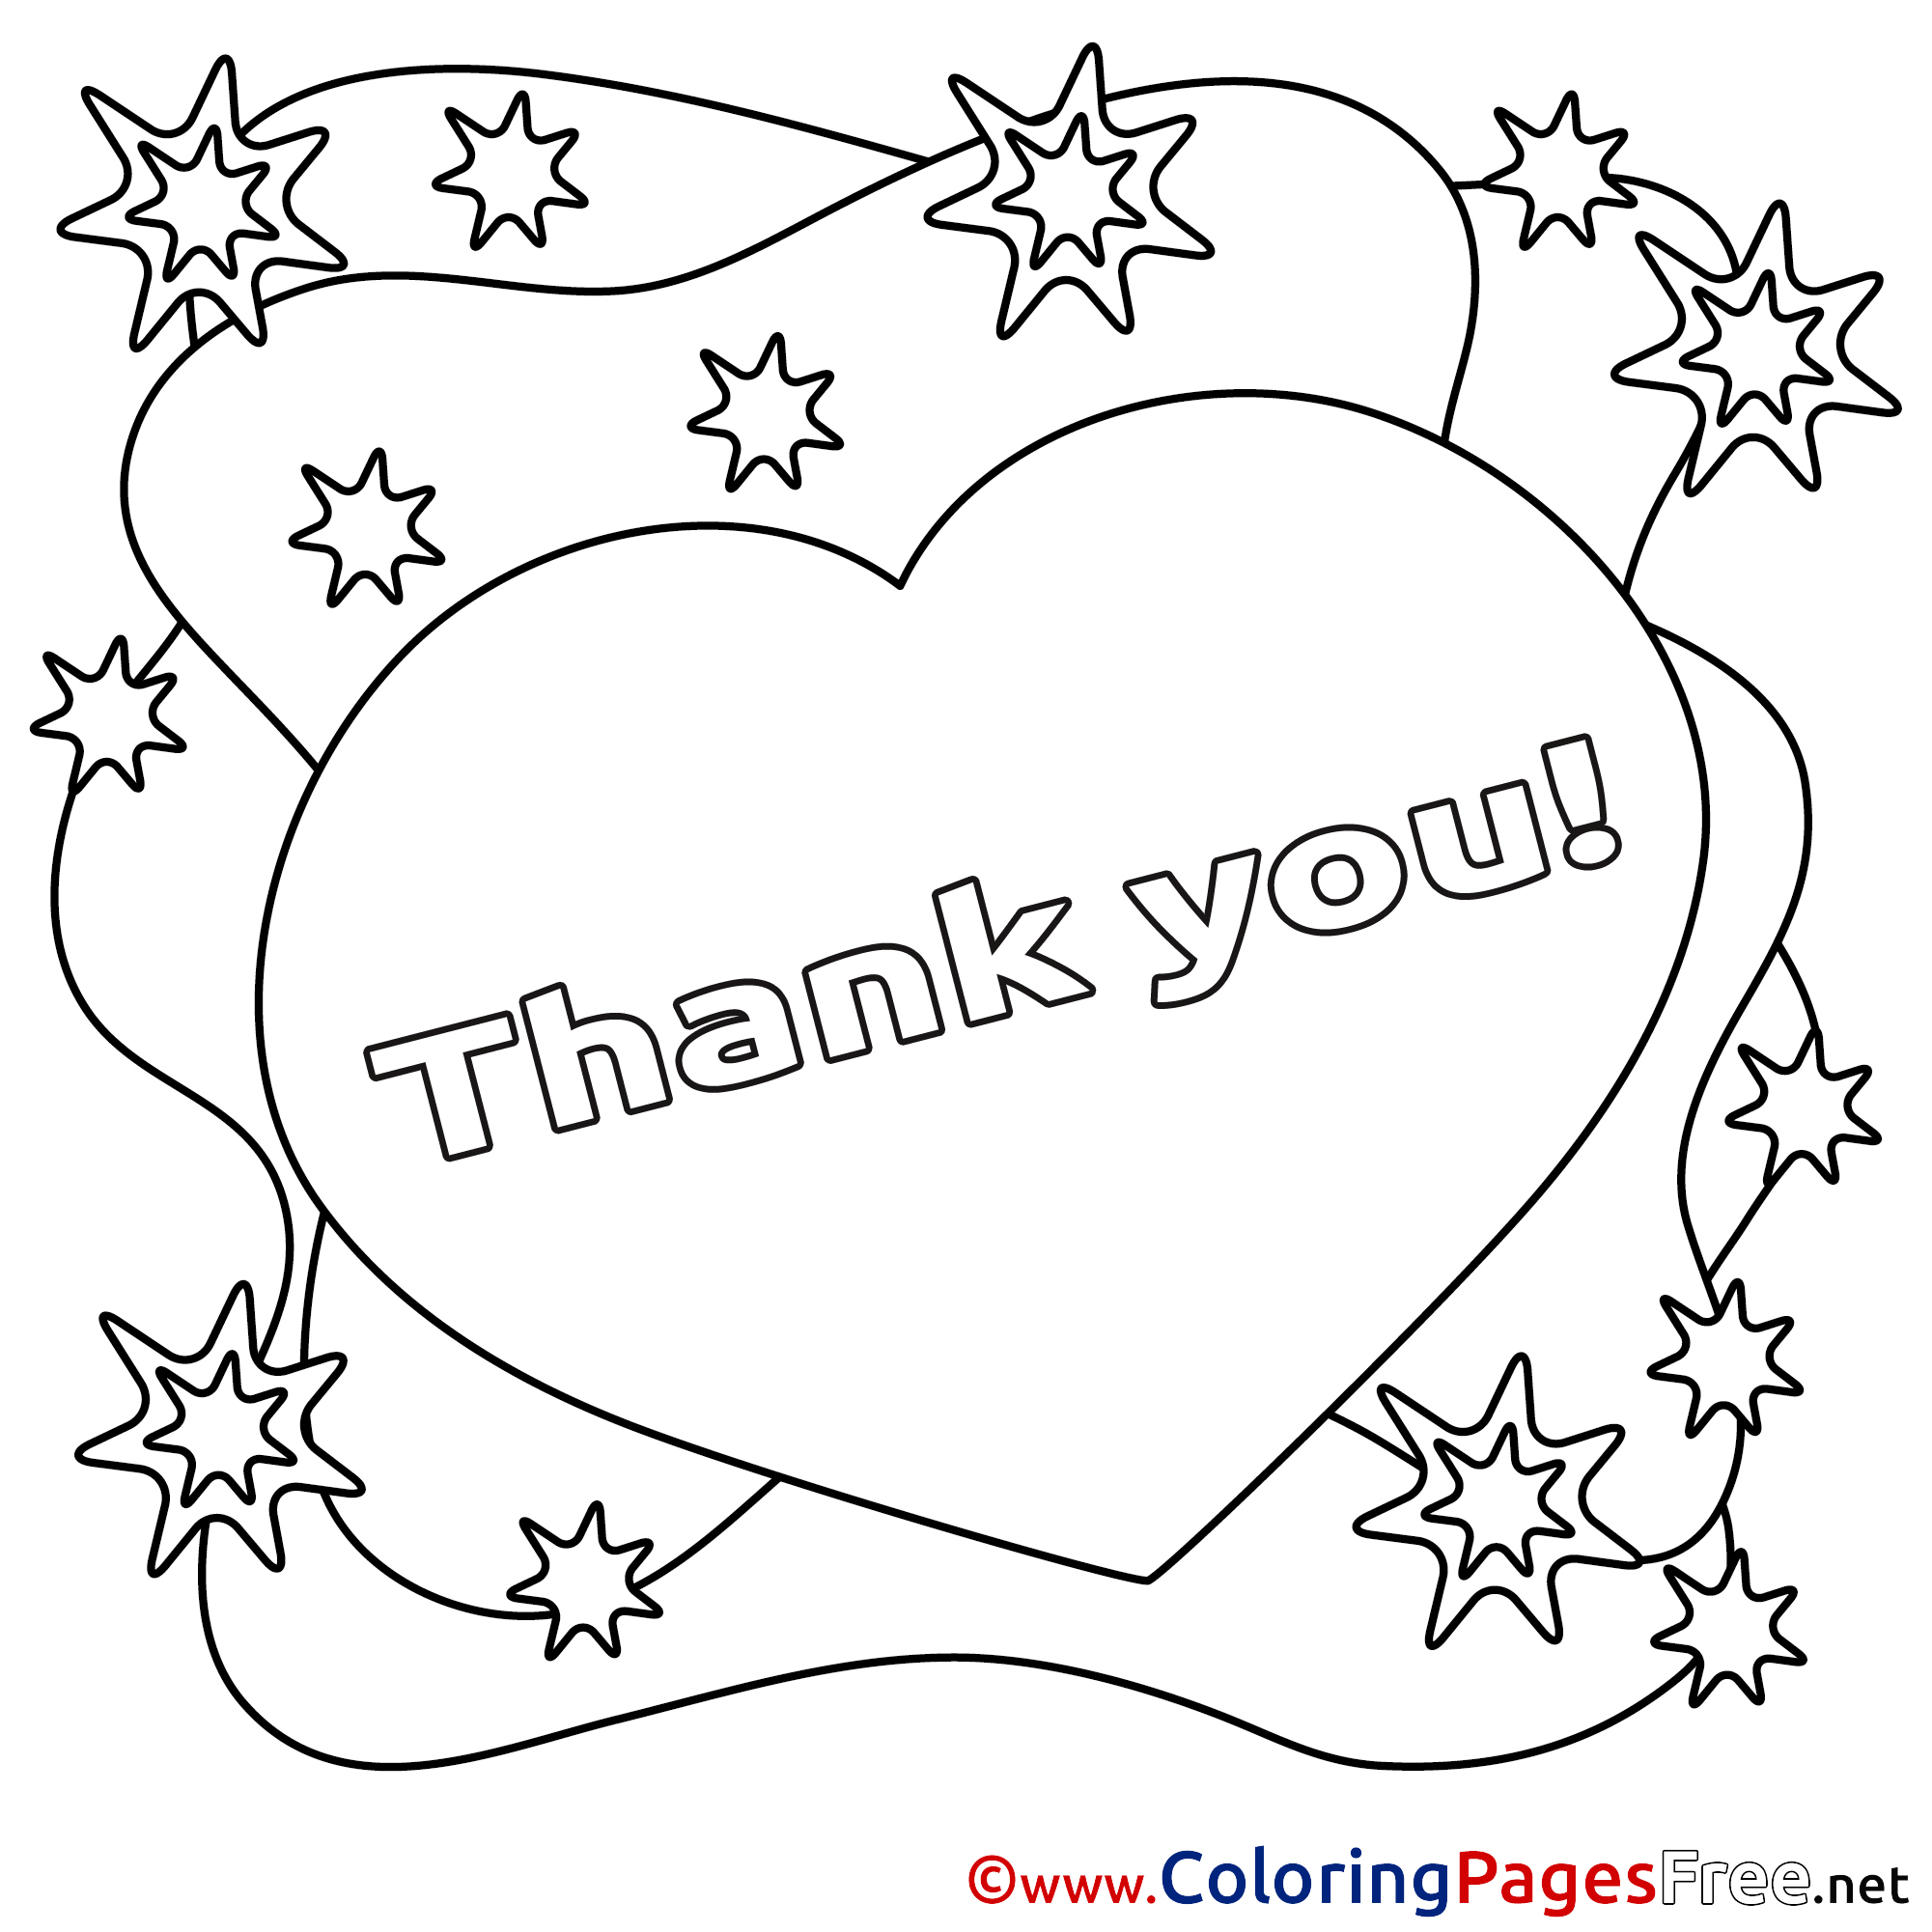 thank-you-god-coloring-pages-at-getdrawings-free-download